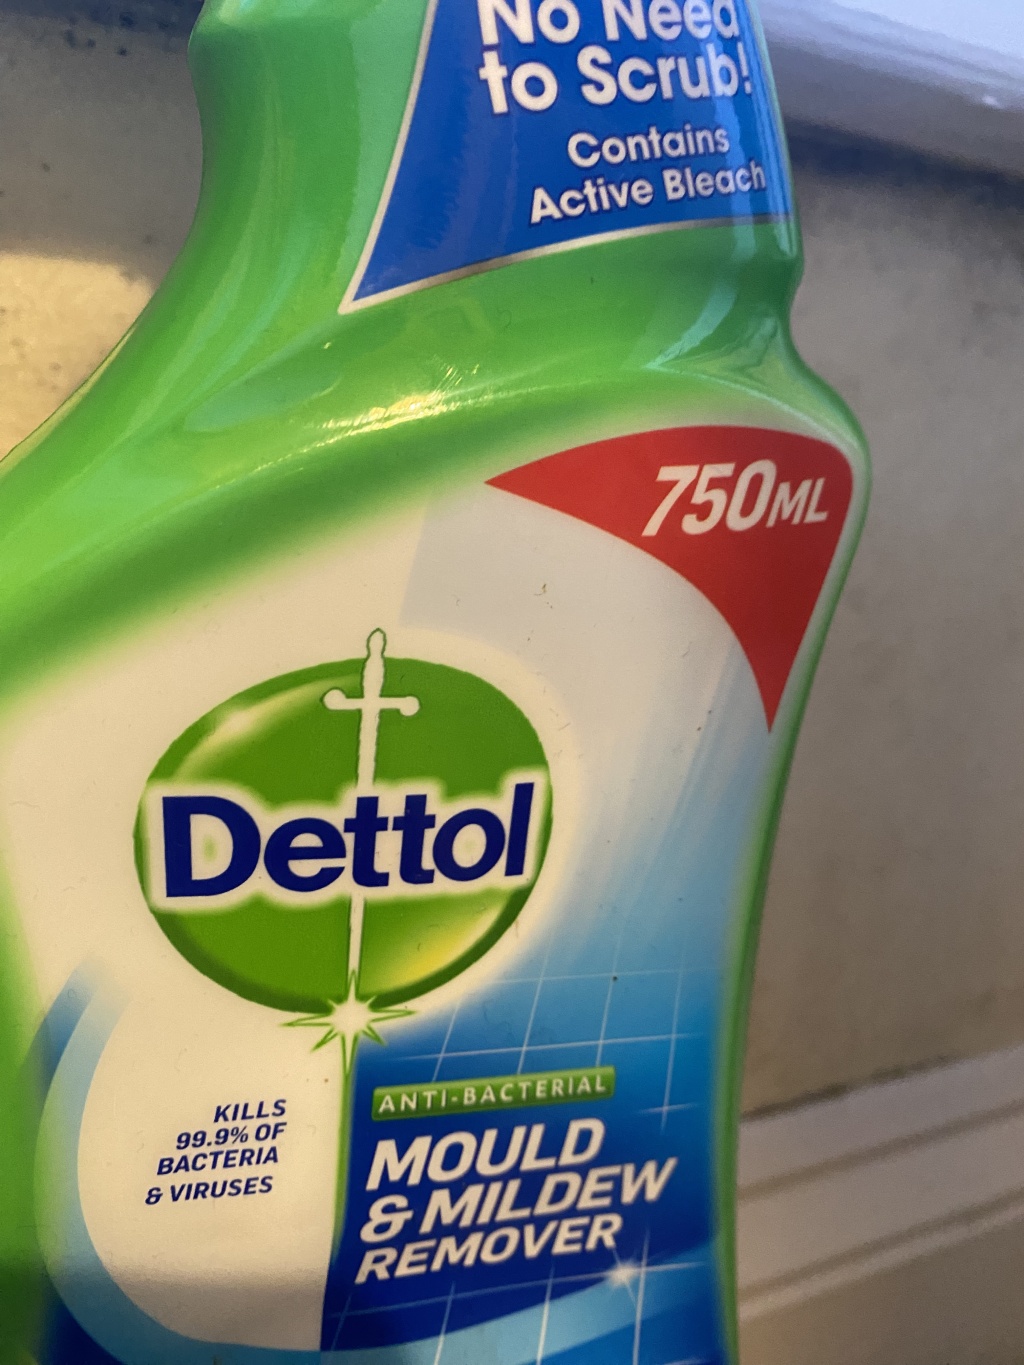 Review: Dettol Anti-Bacterial Mould and Mildew Remover